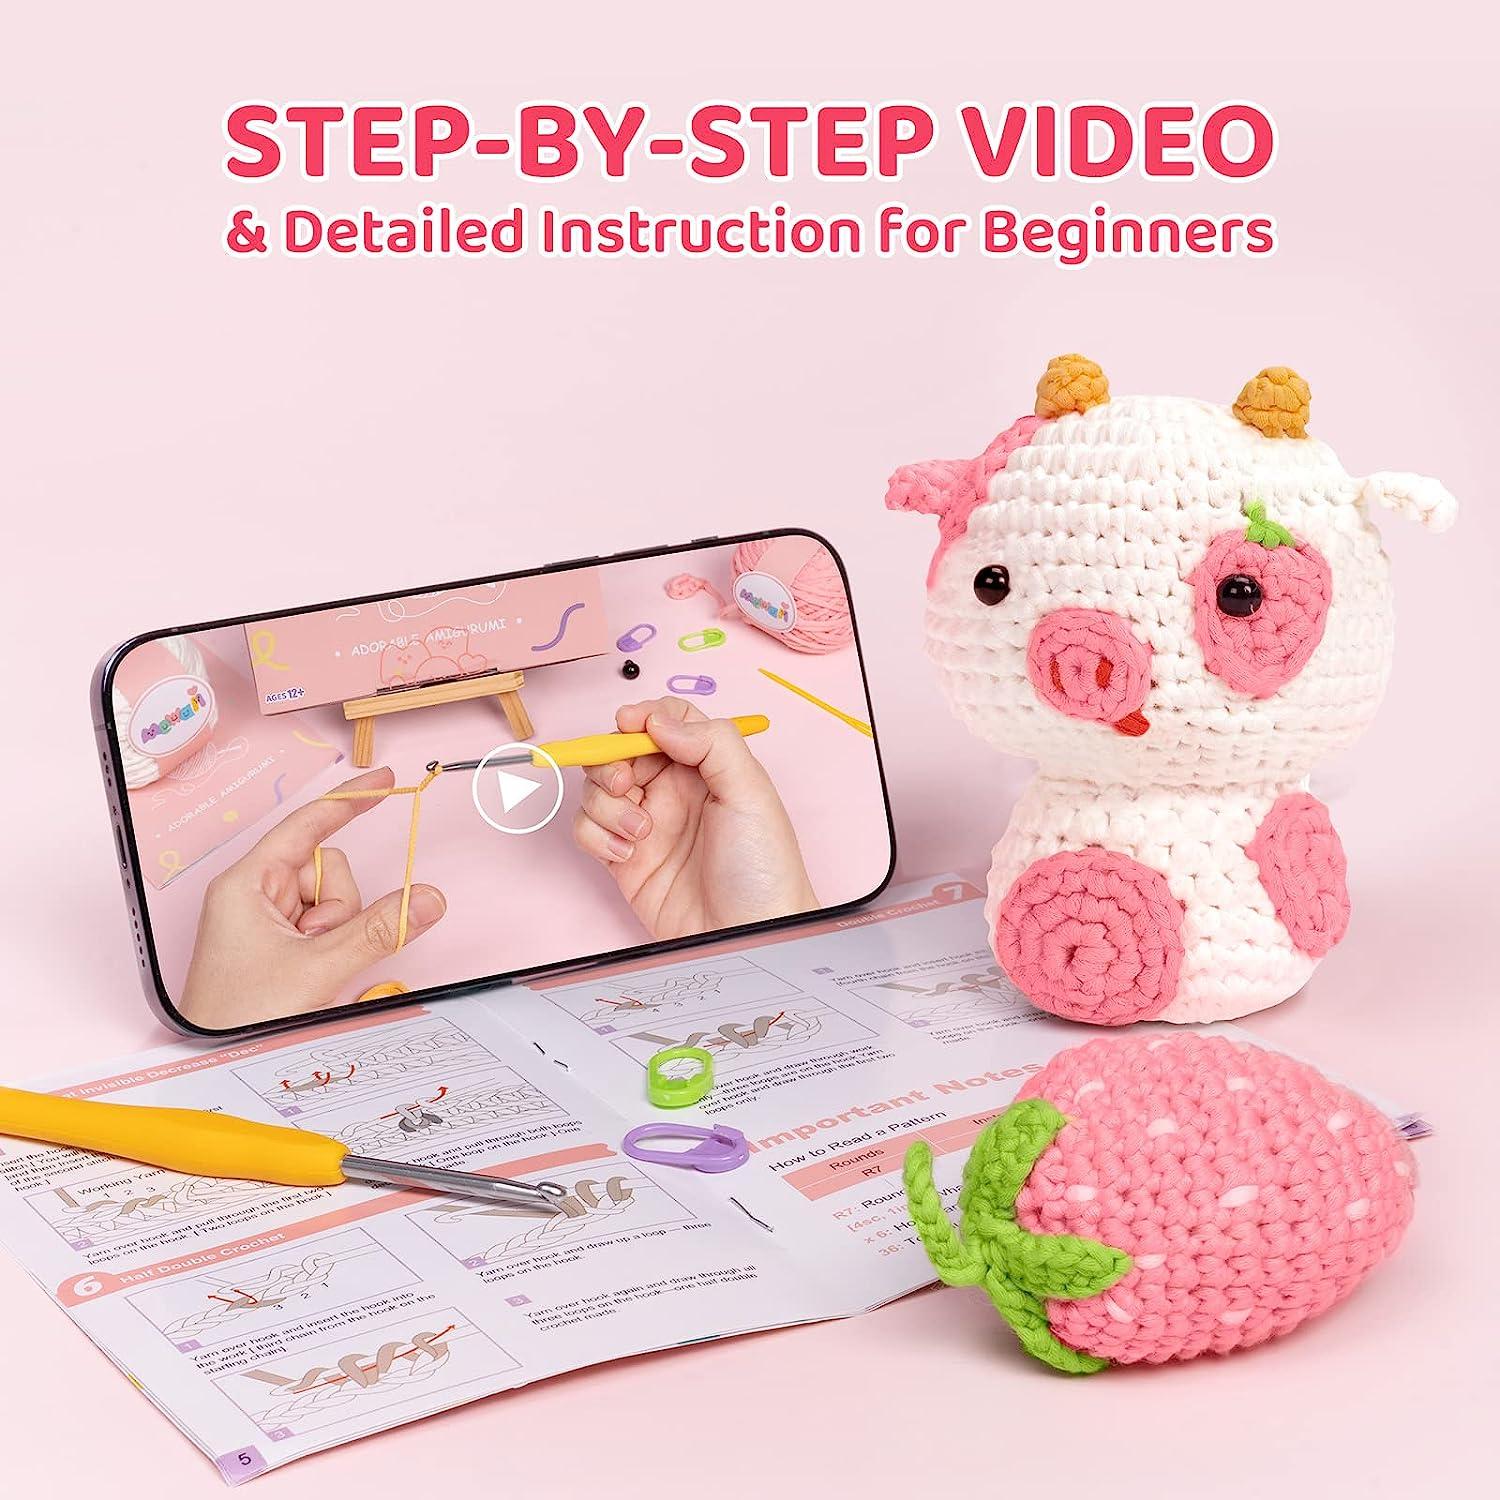 Mewaii Crochet Kit for Beginners, Complete DIY Kit with Pre-Started Yarn, Step-by-Step Videos (Strawberry Cow), Size: 4.7, Pink